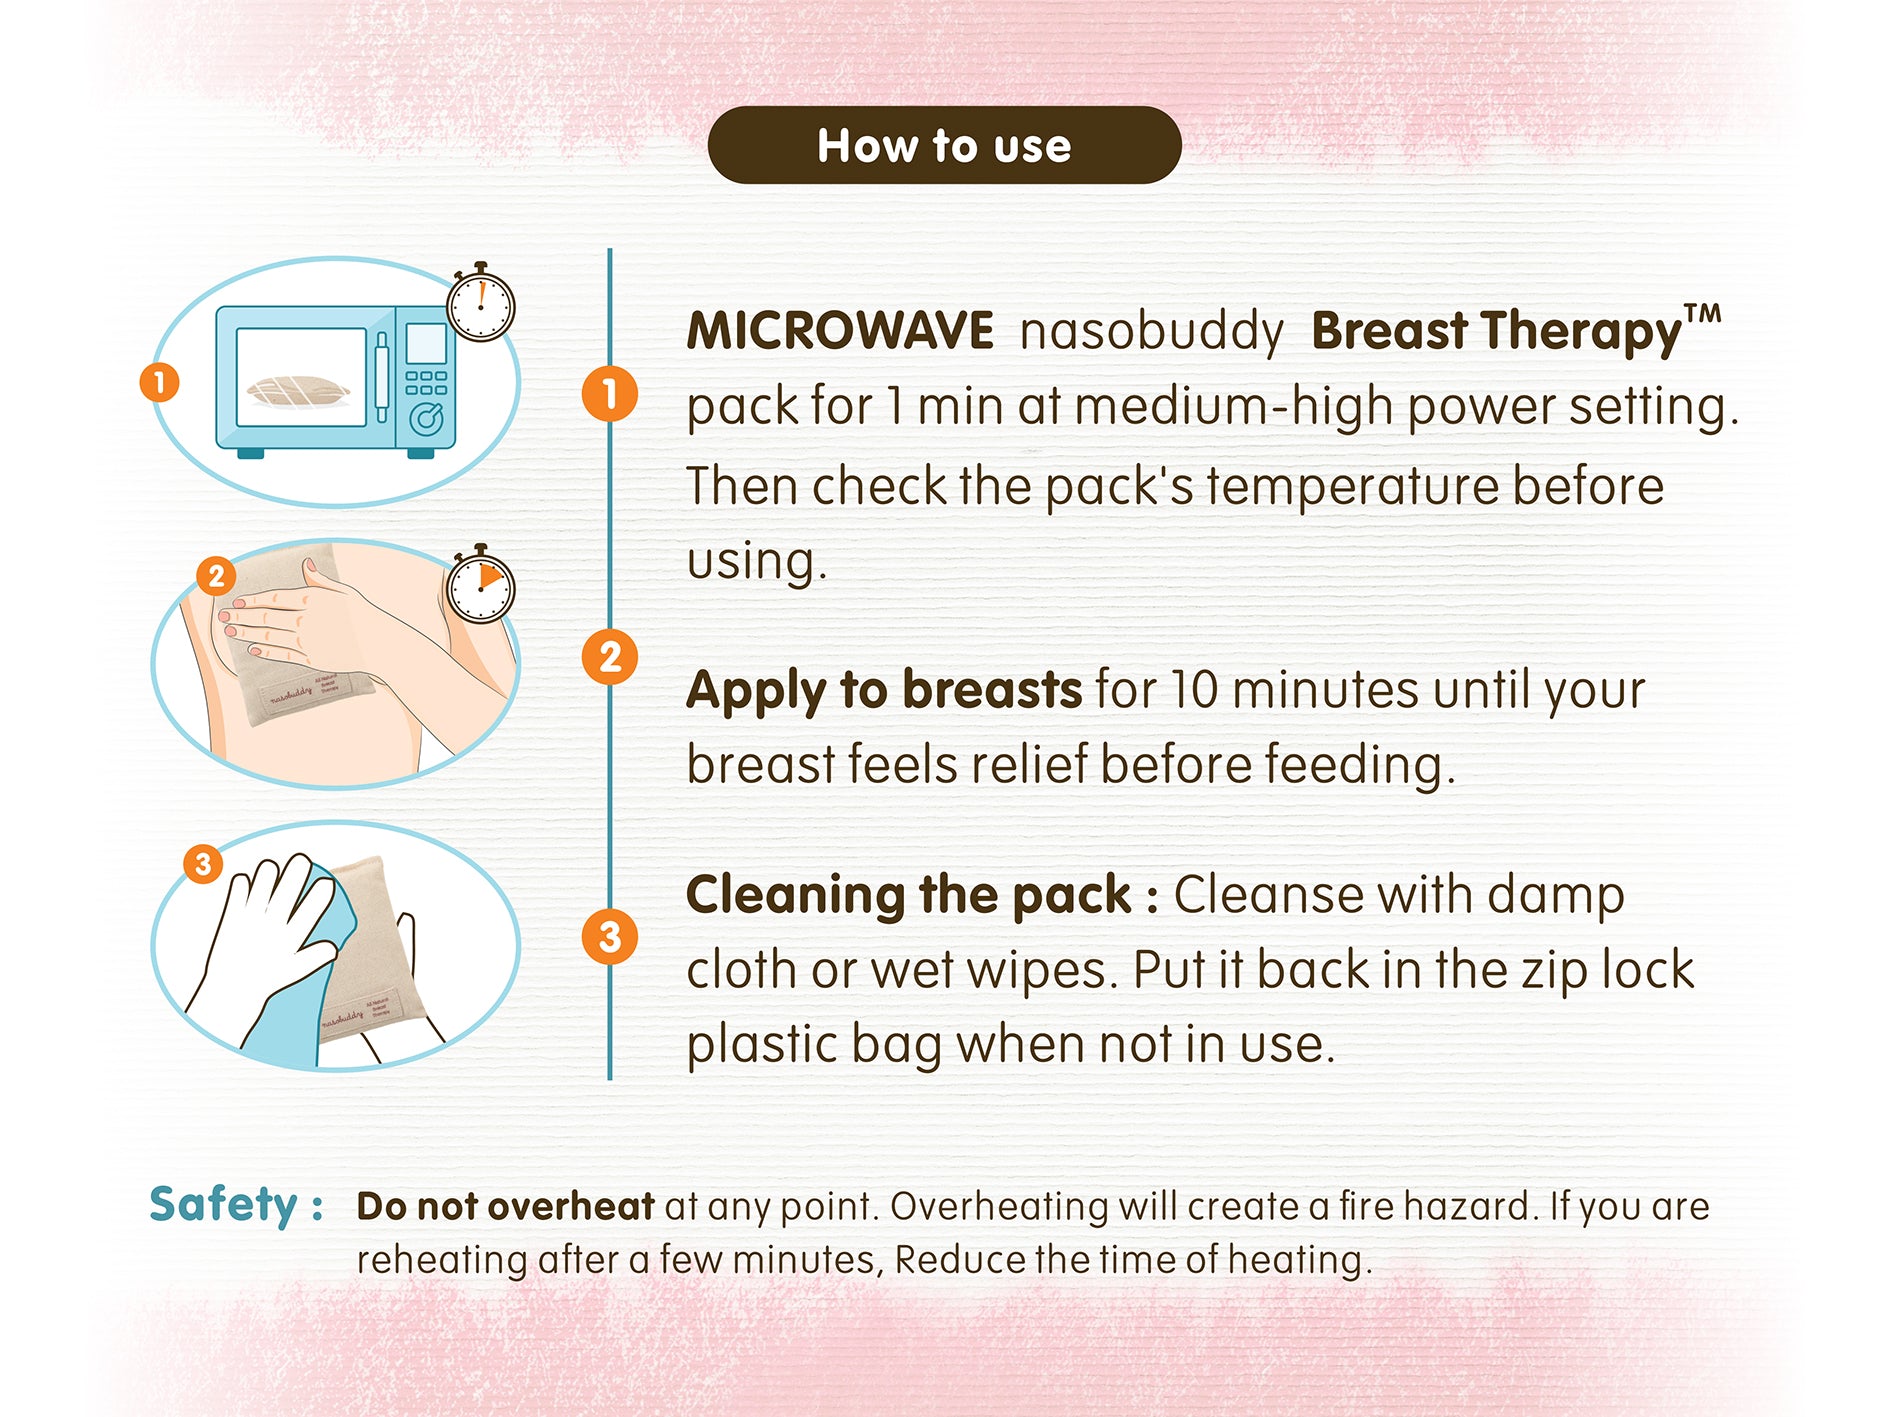 Breast-Ease, Breast Therapeutic Support Packs